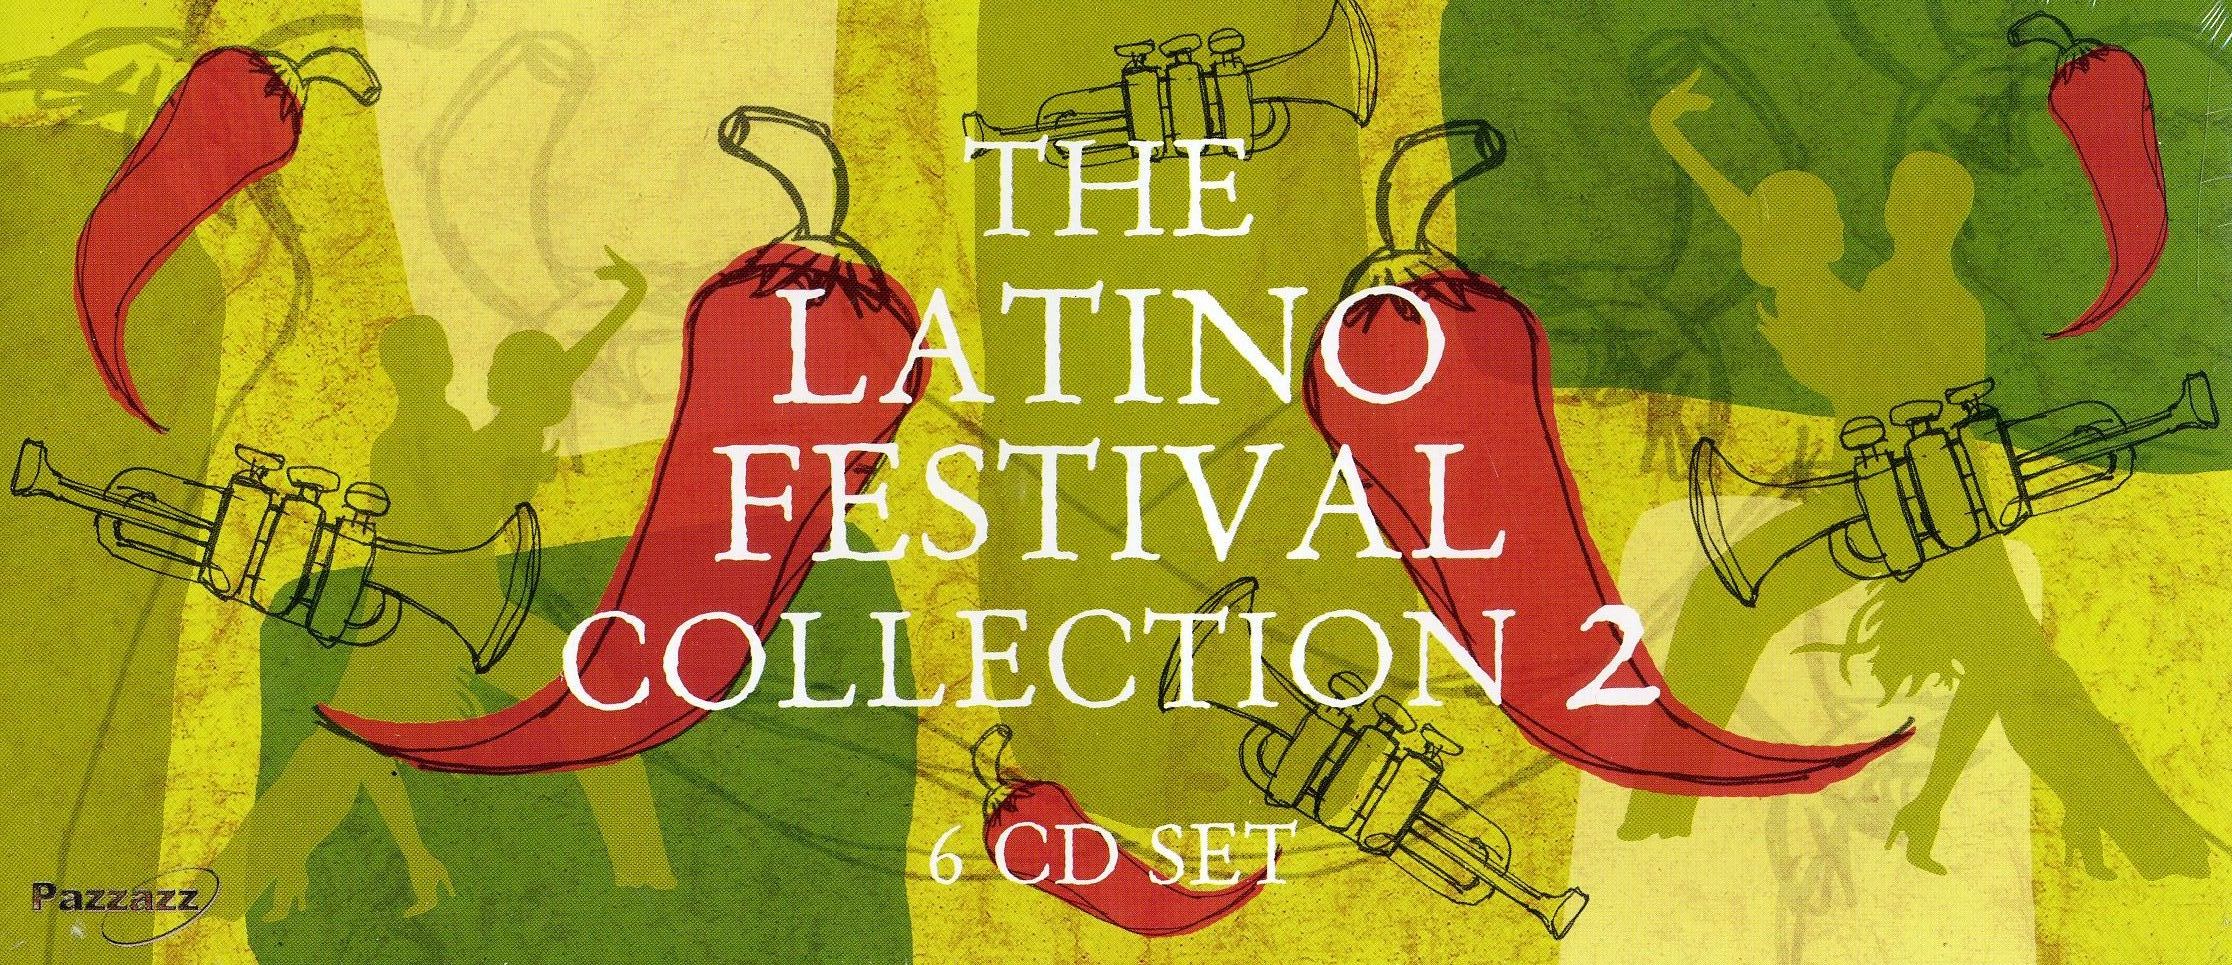 LATINO FESTIVAL COLLECTION 2 / VARIOUS